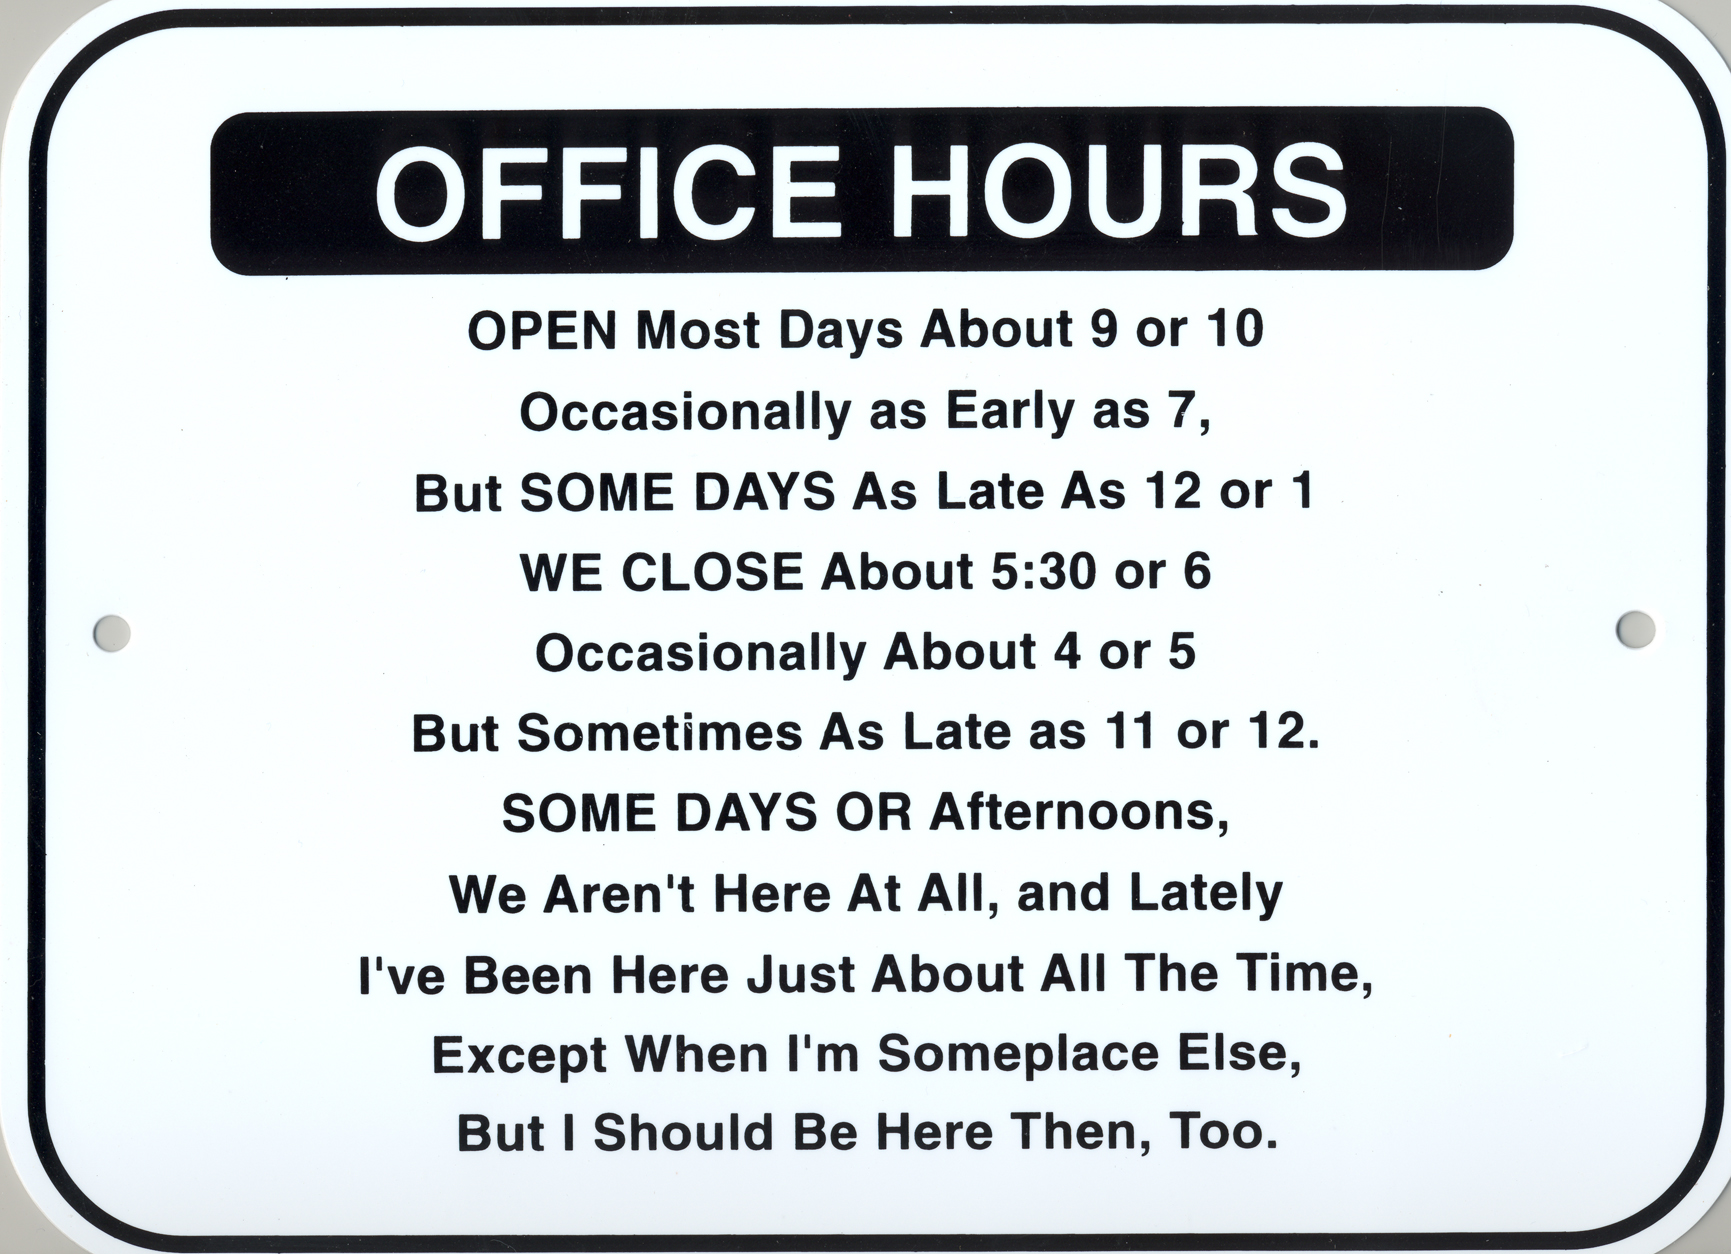 Funny Office Signs 20 Wide Wallpaper - Funnypicture.org